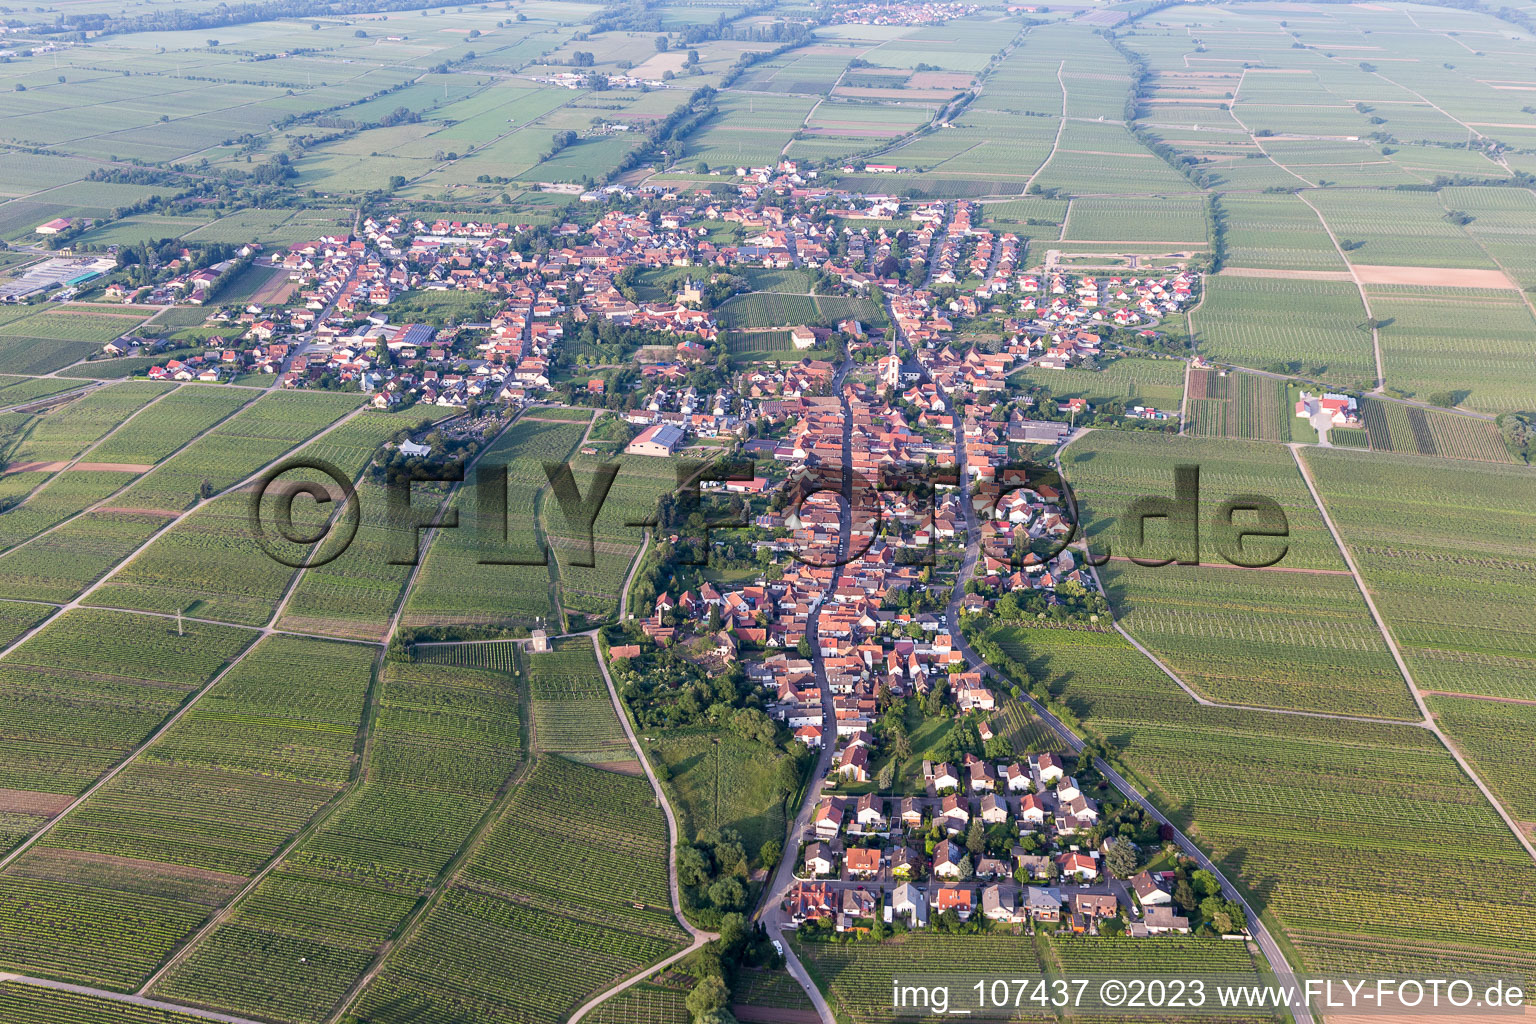 Oblique view of Edesheim in the state Rhineland-Palatinate, Germany